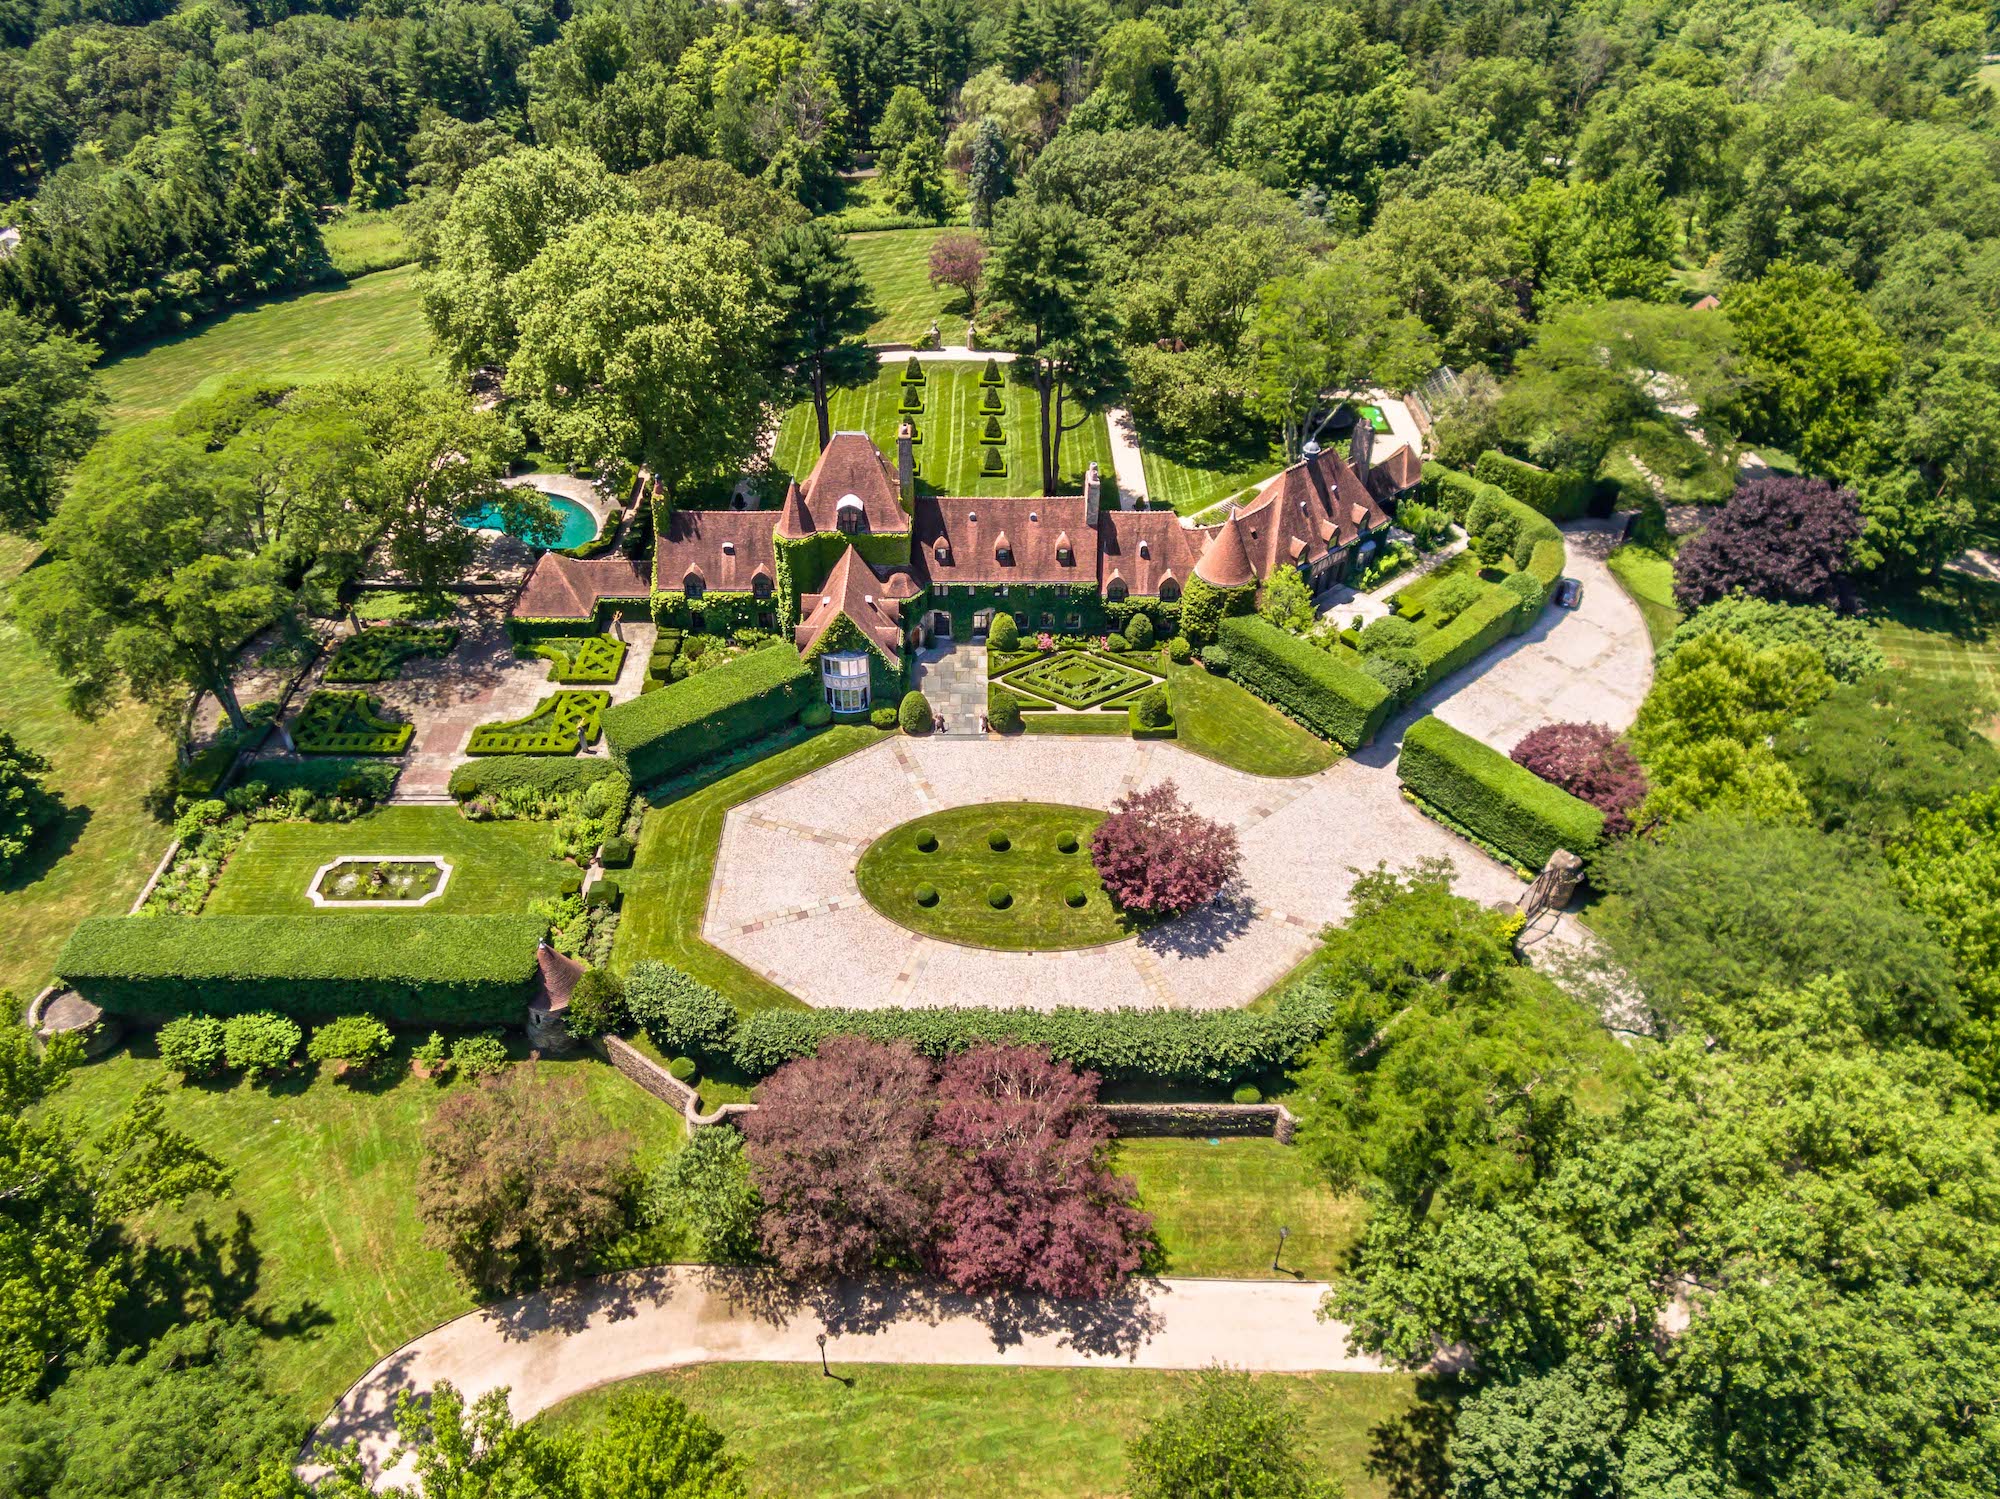 Hilfiger sells chateau-style Connecticut for $45M 6sqft